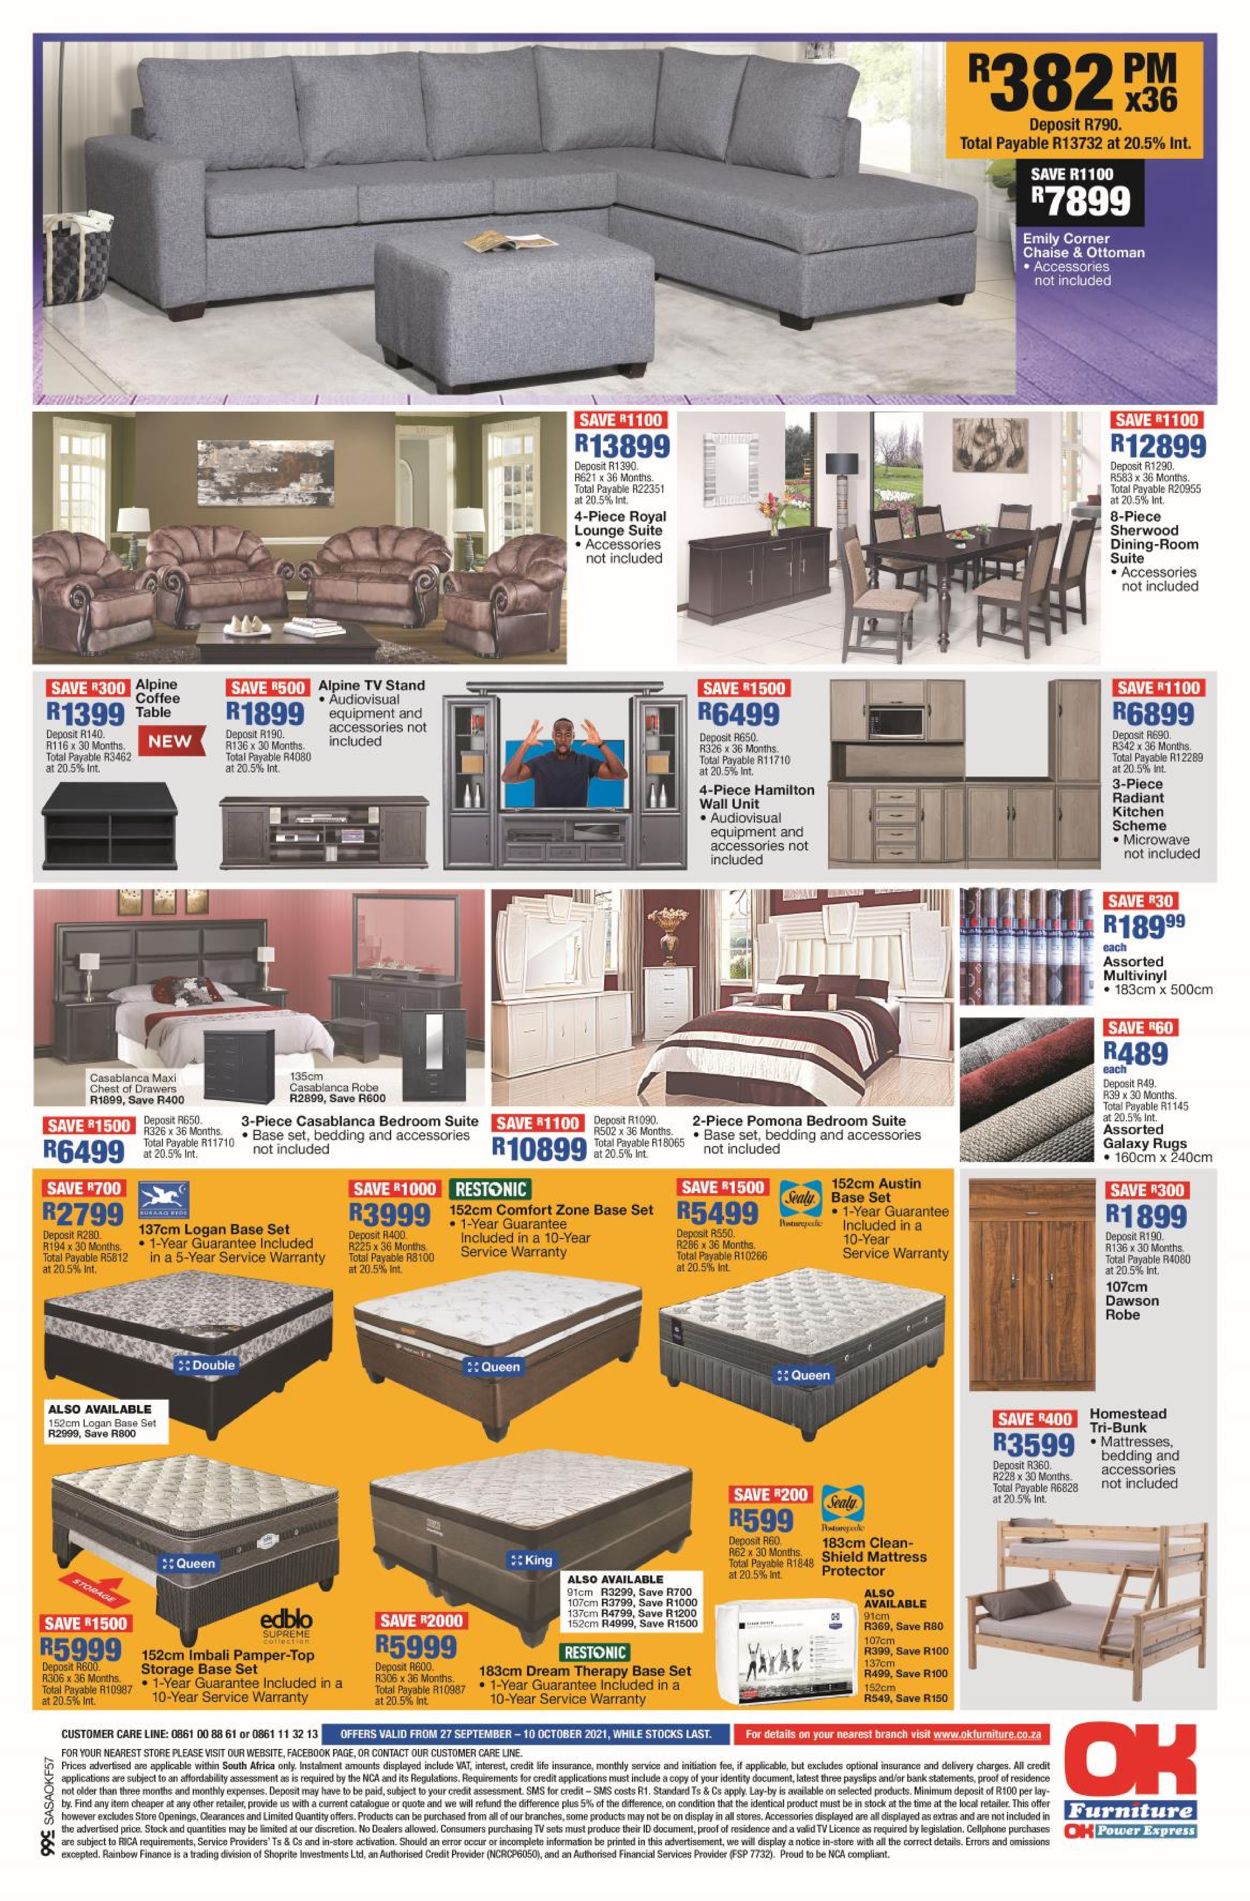 OK Furniture Catalogue from 2021/09/27